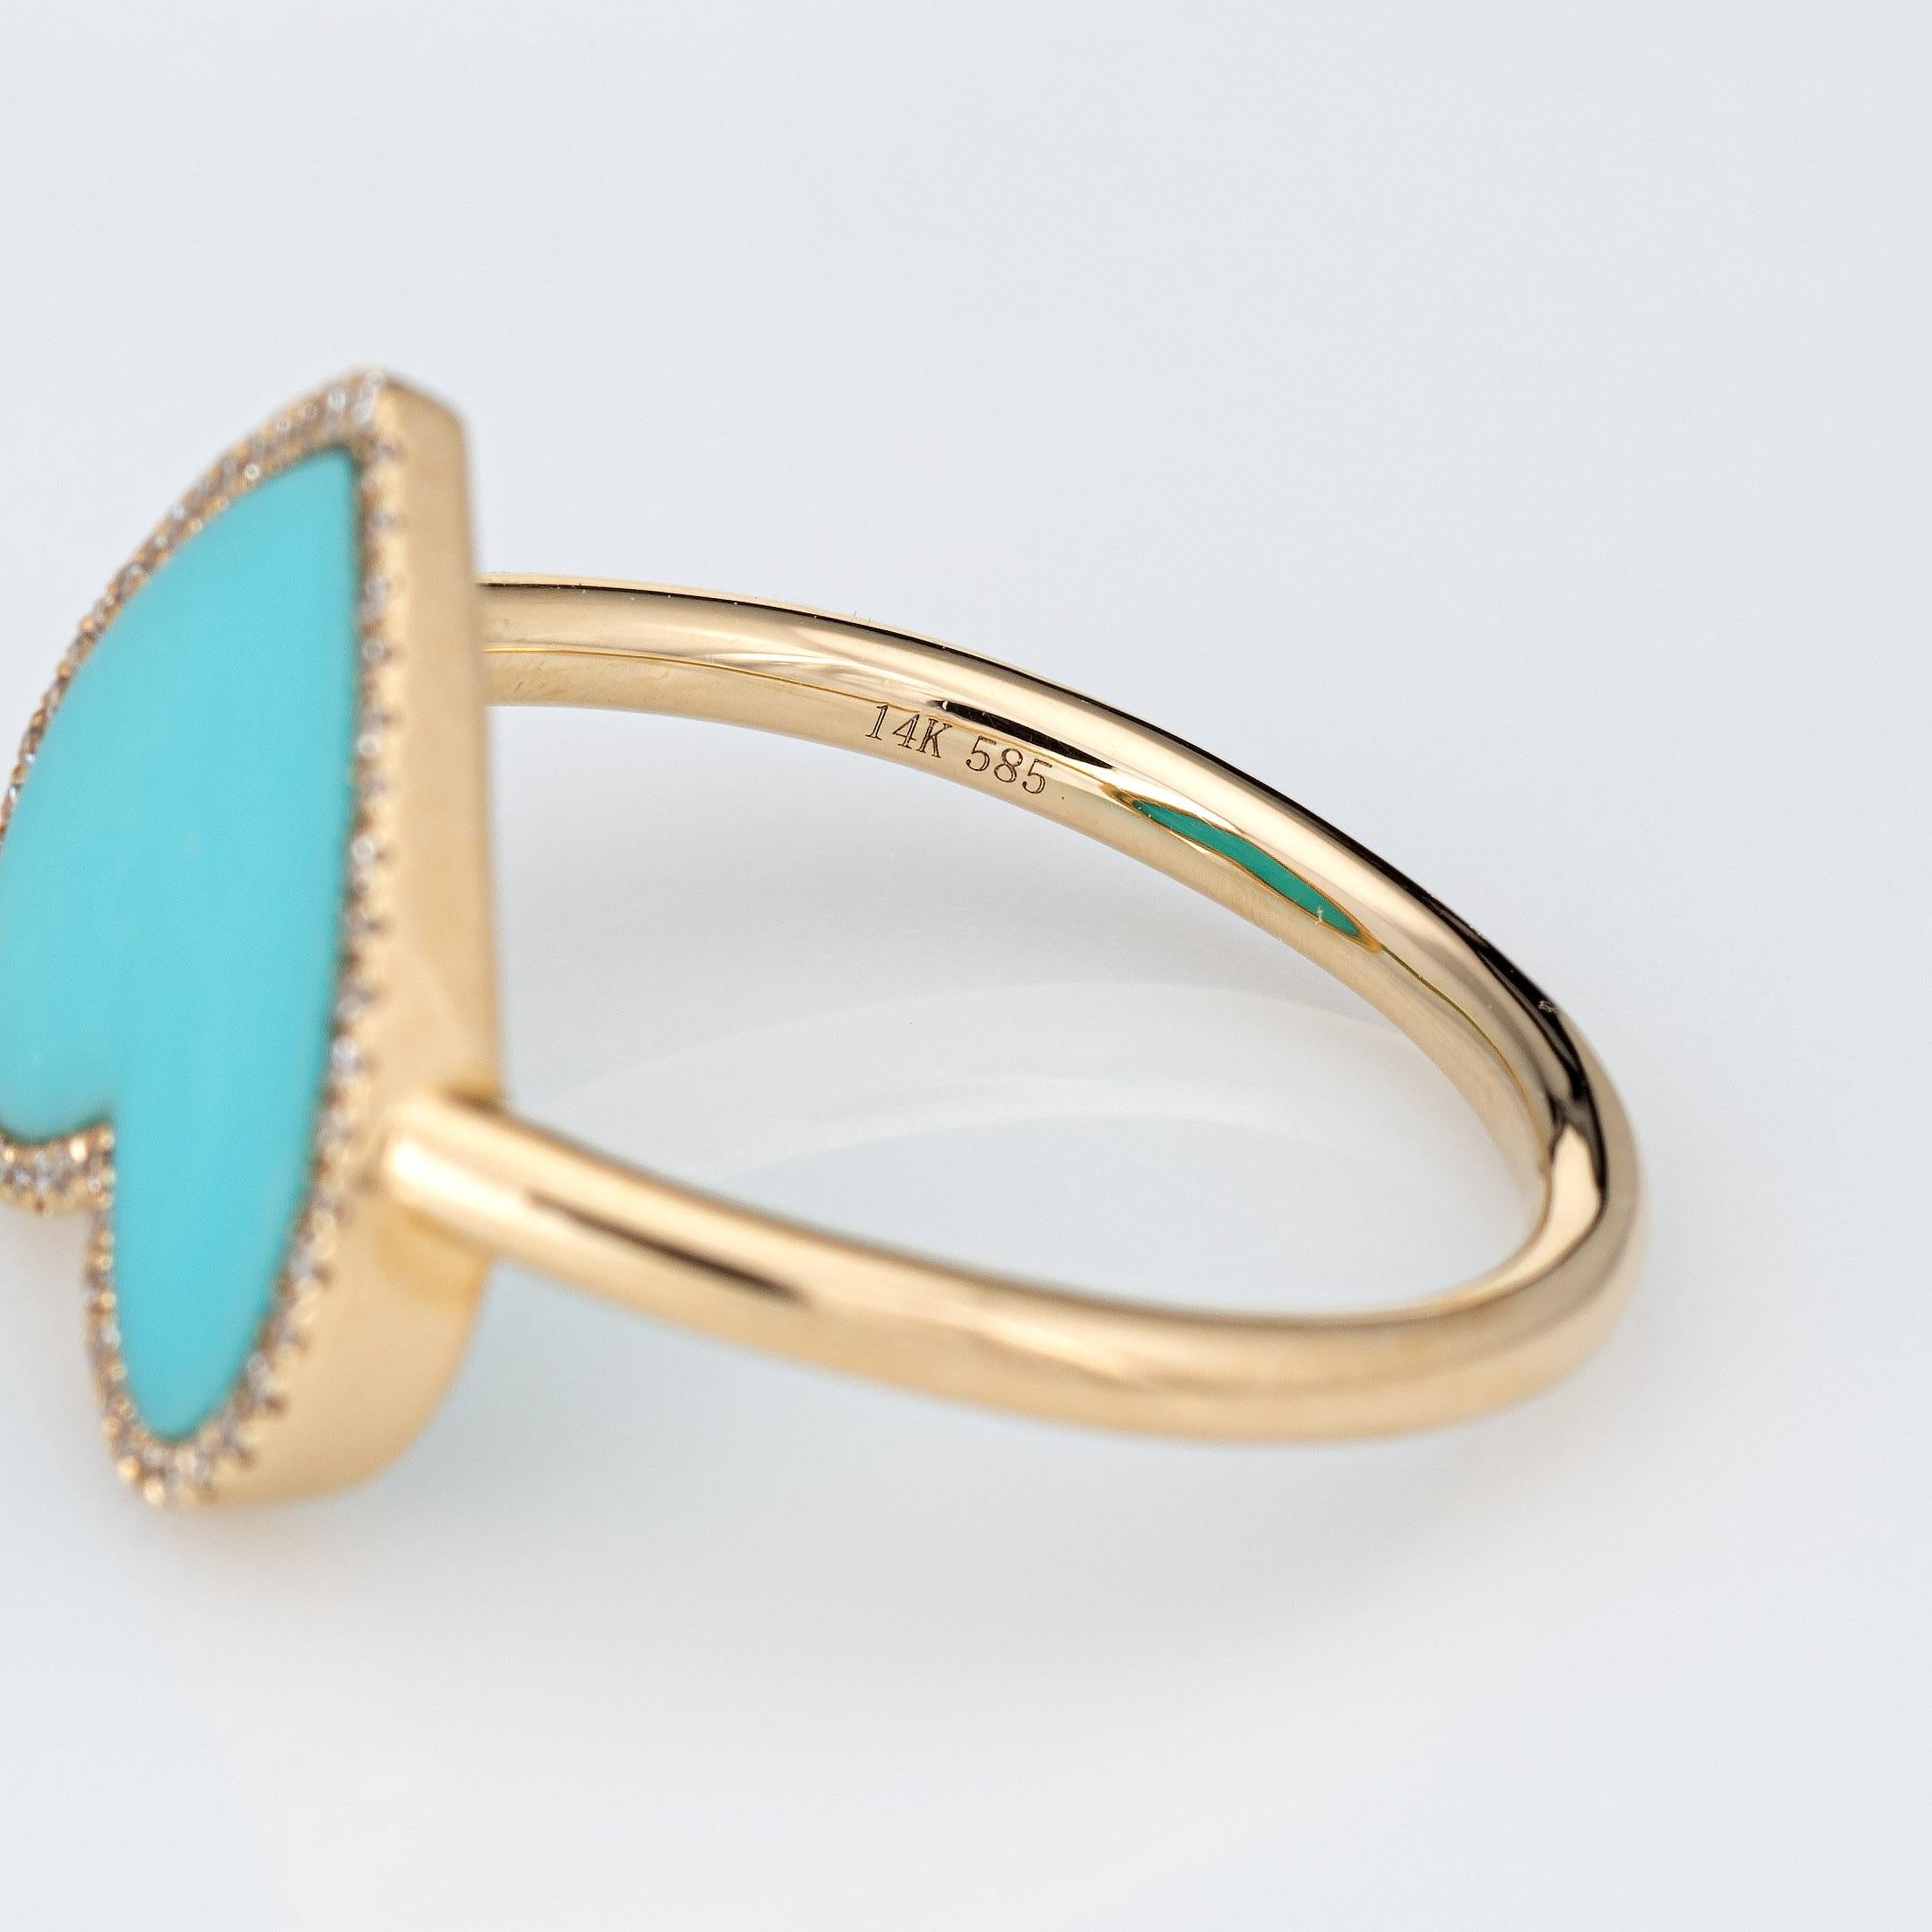 Women's Turquoise Diamond Heart Ring Estate 14k Yellow Gold Large Cocktail Jewelry